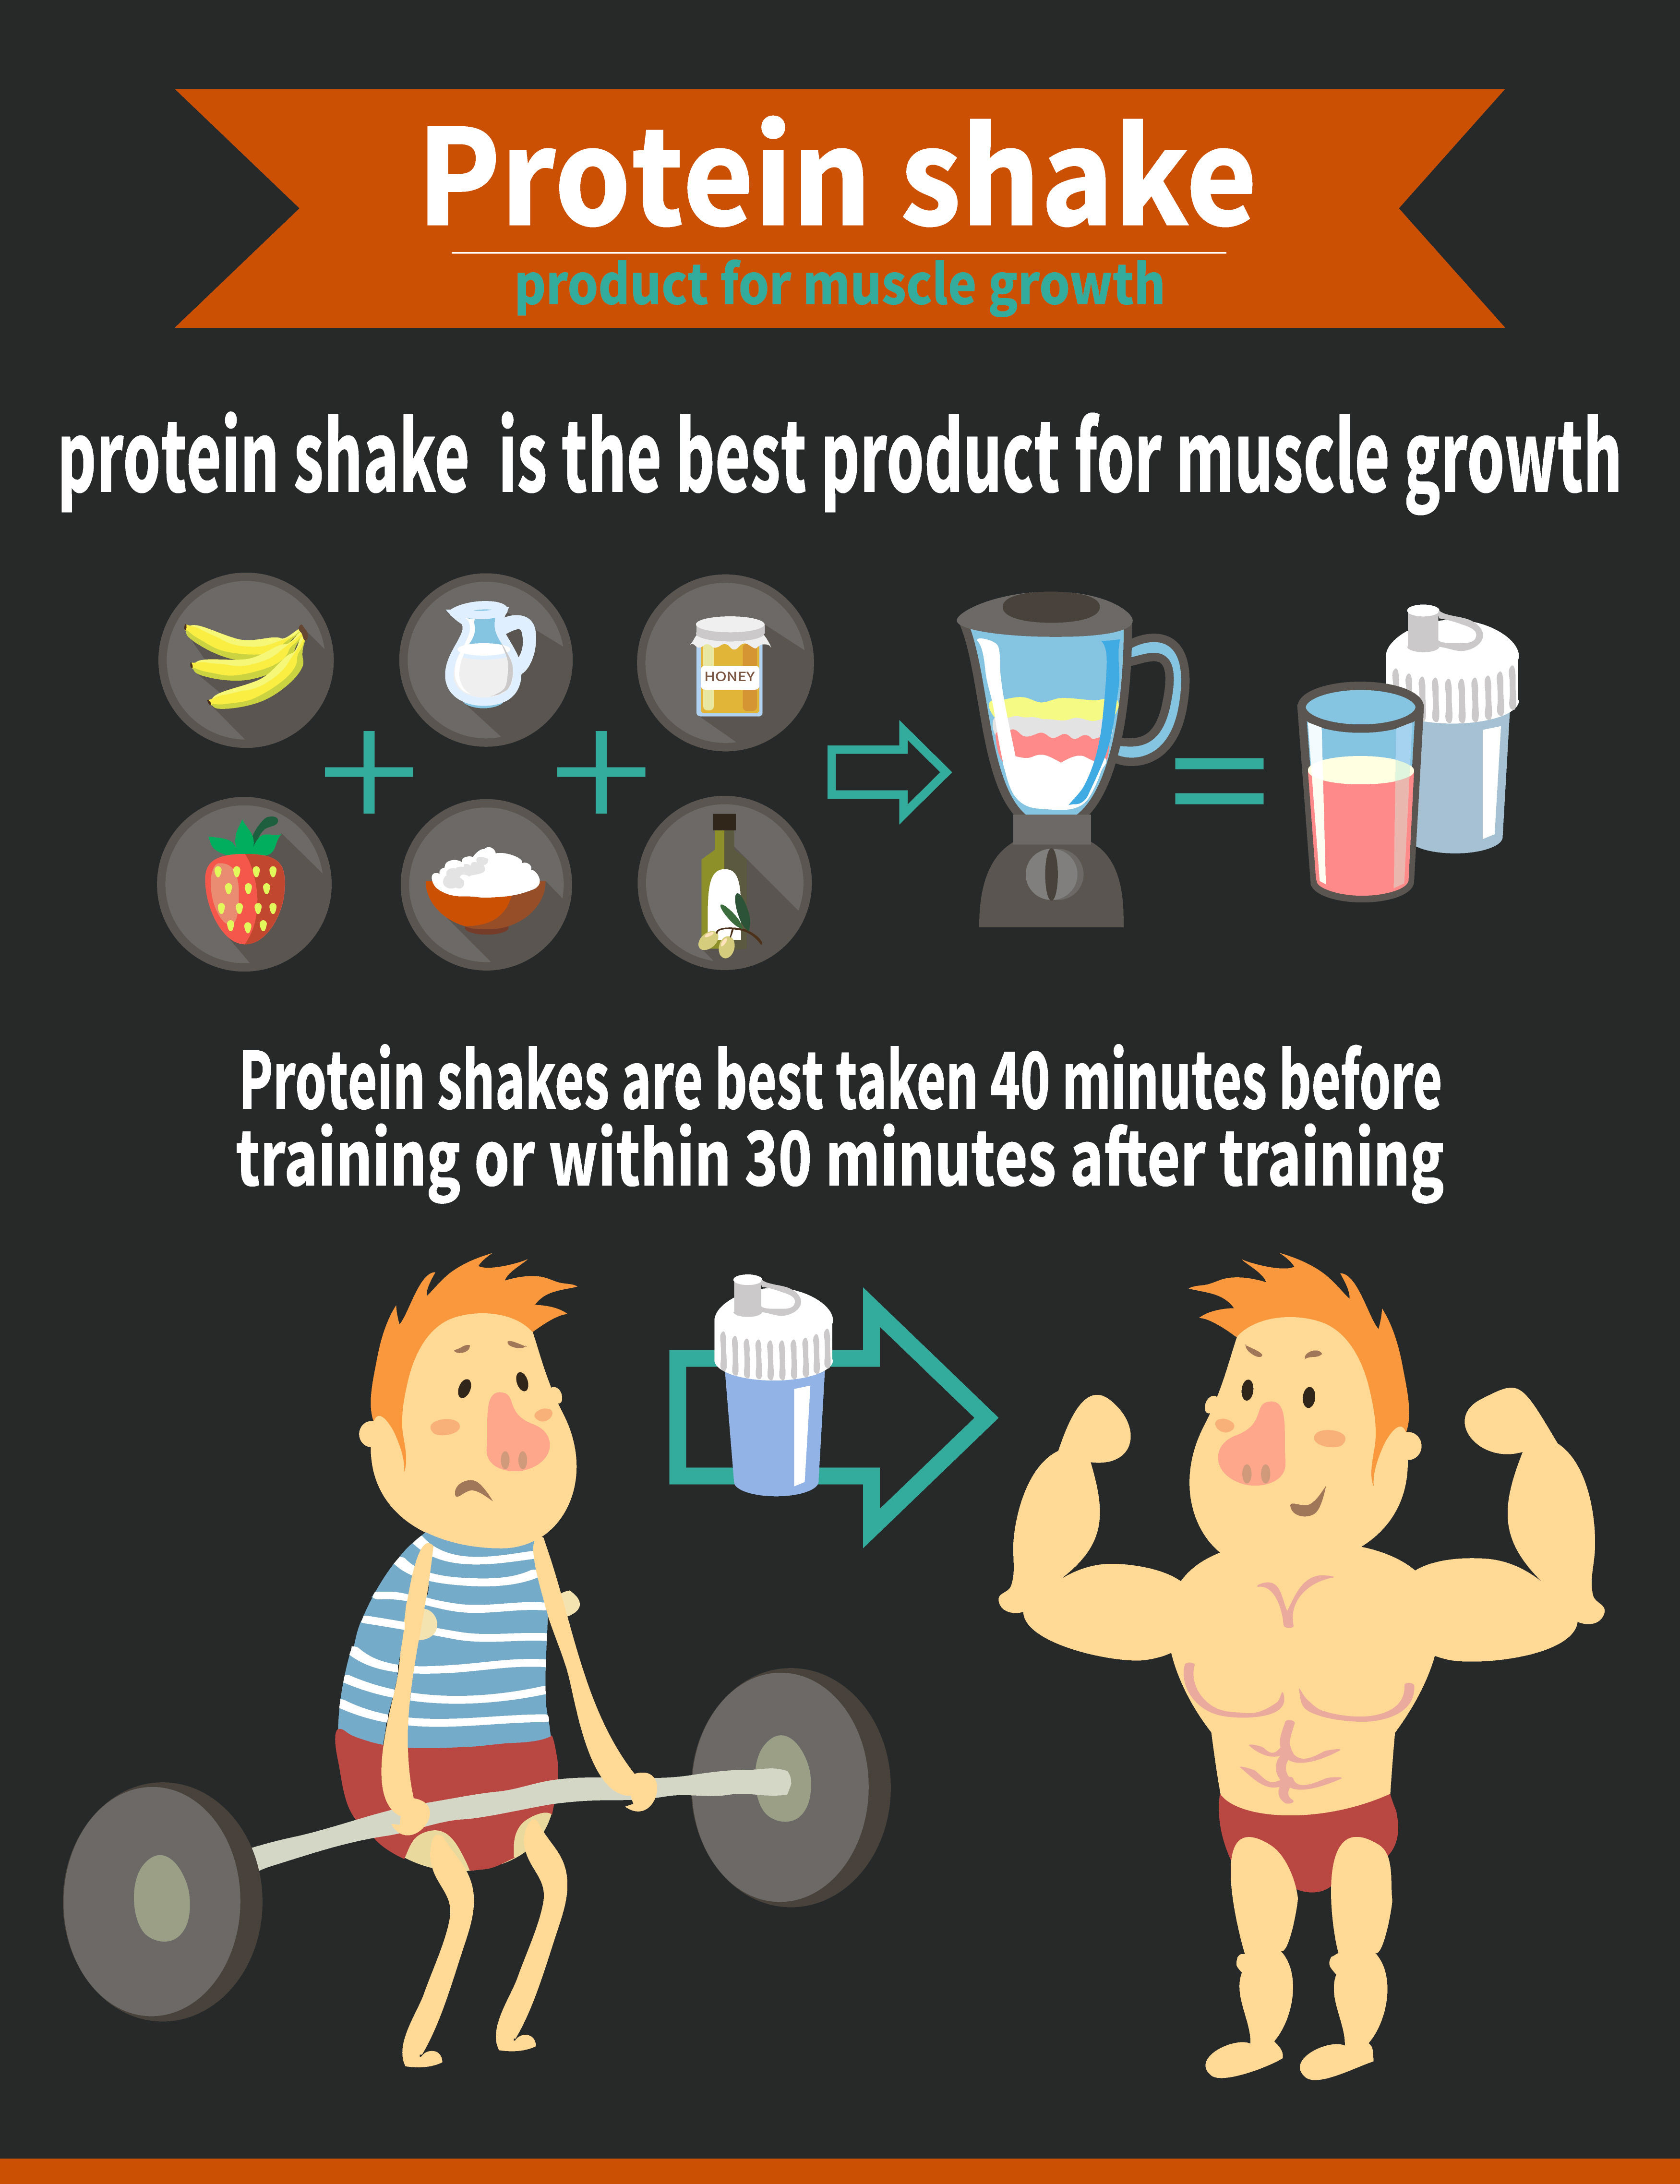 Benefits of protein shakes